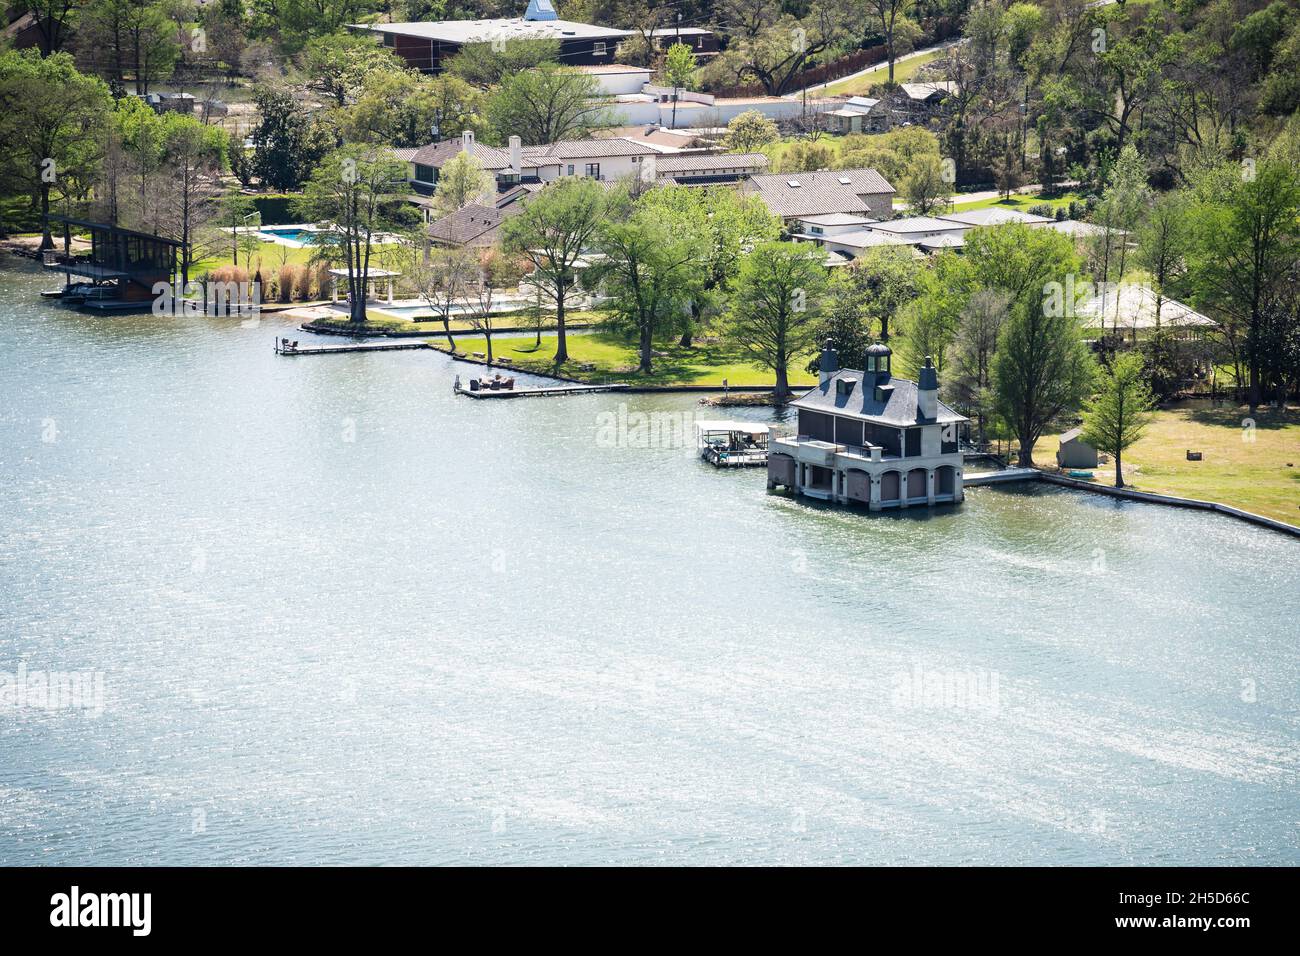 Colorado River in Austin Texas with Big Houses on the Waterfront and Boat Houses Stock Photo